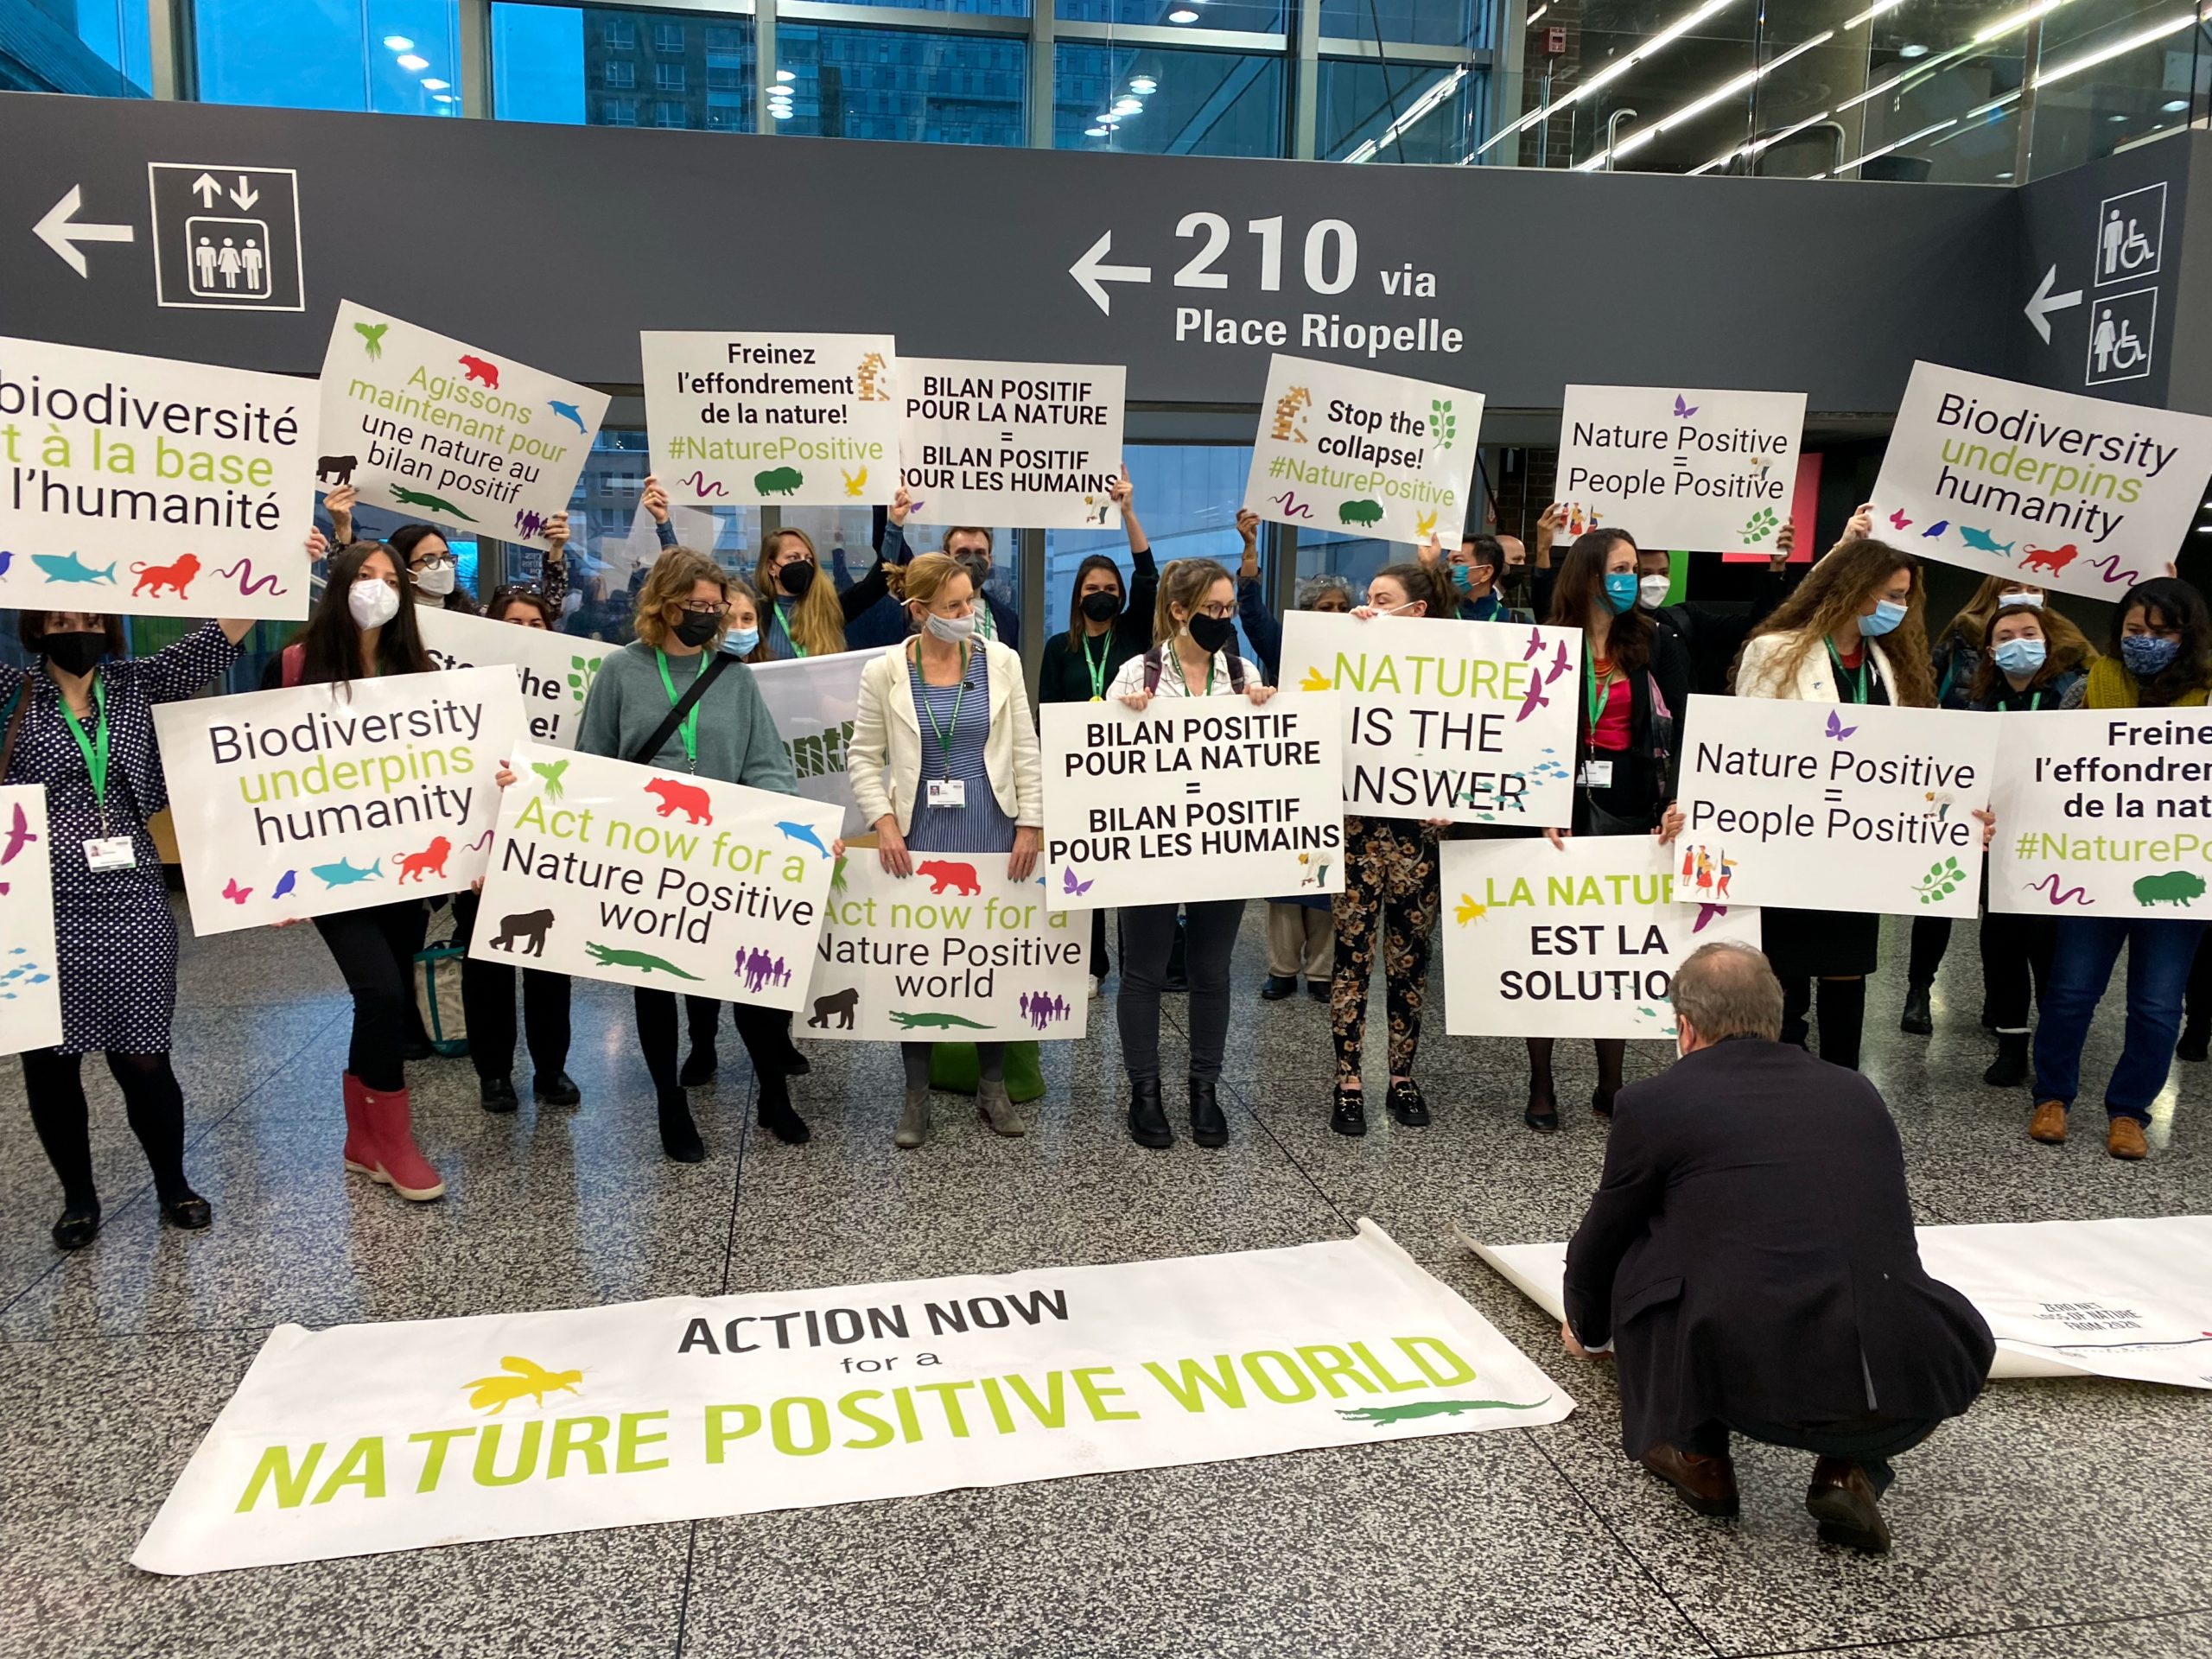 Demonstrators with pro-biodiversity signs